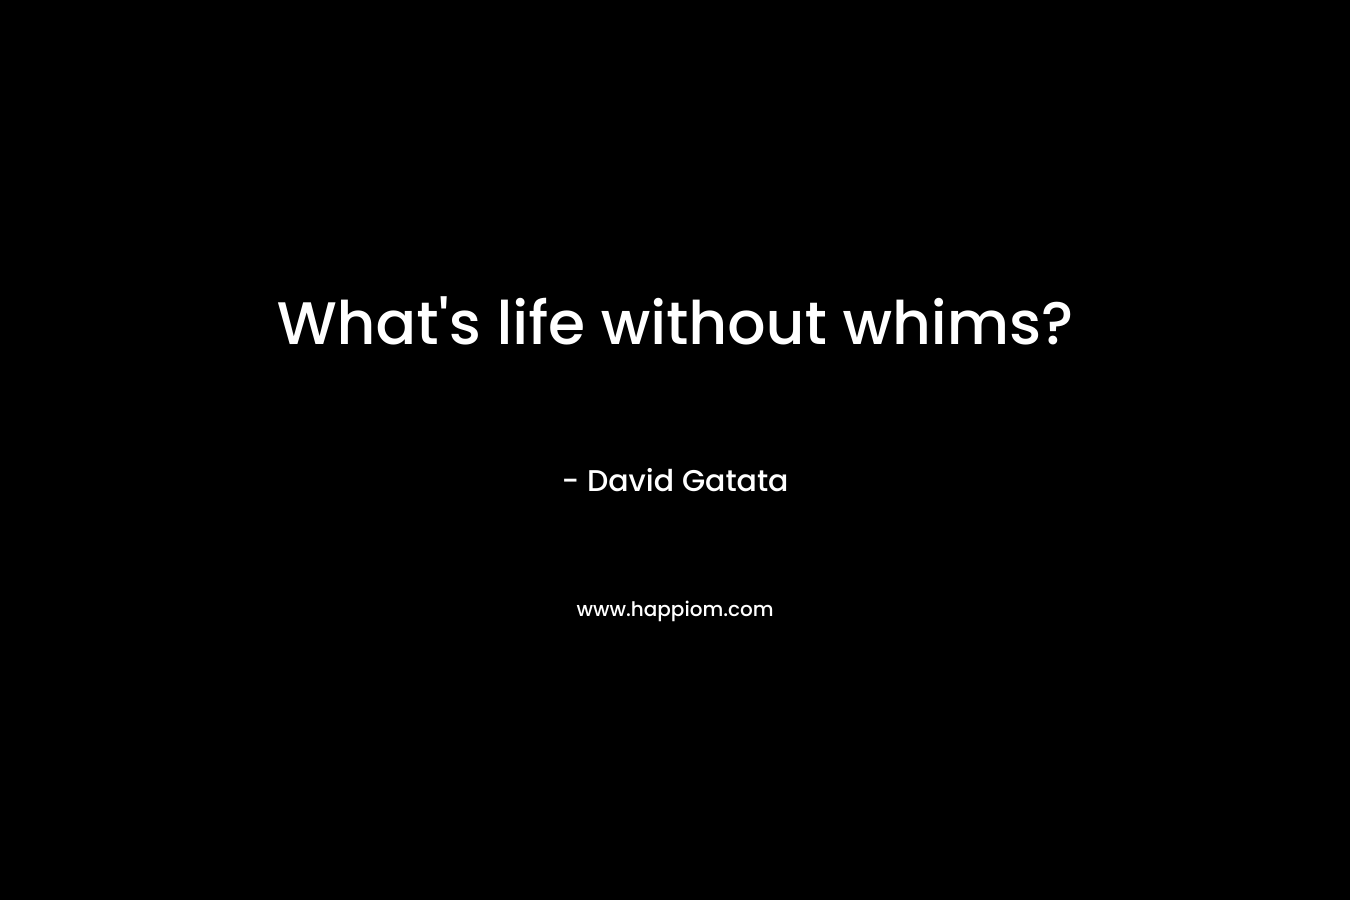 What’s life without whims? – David Gatata